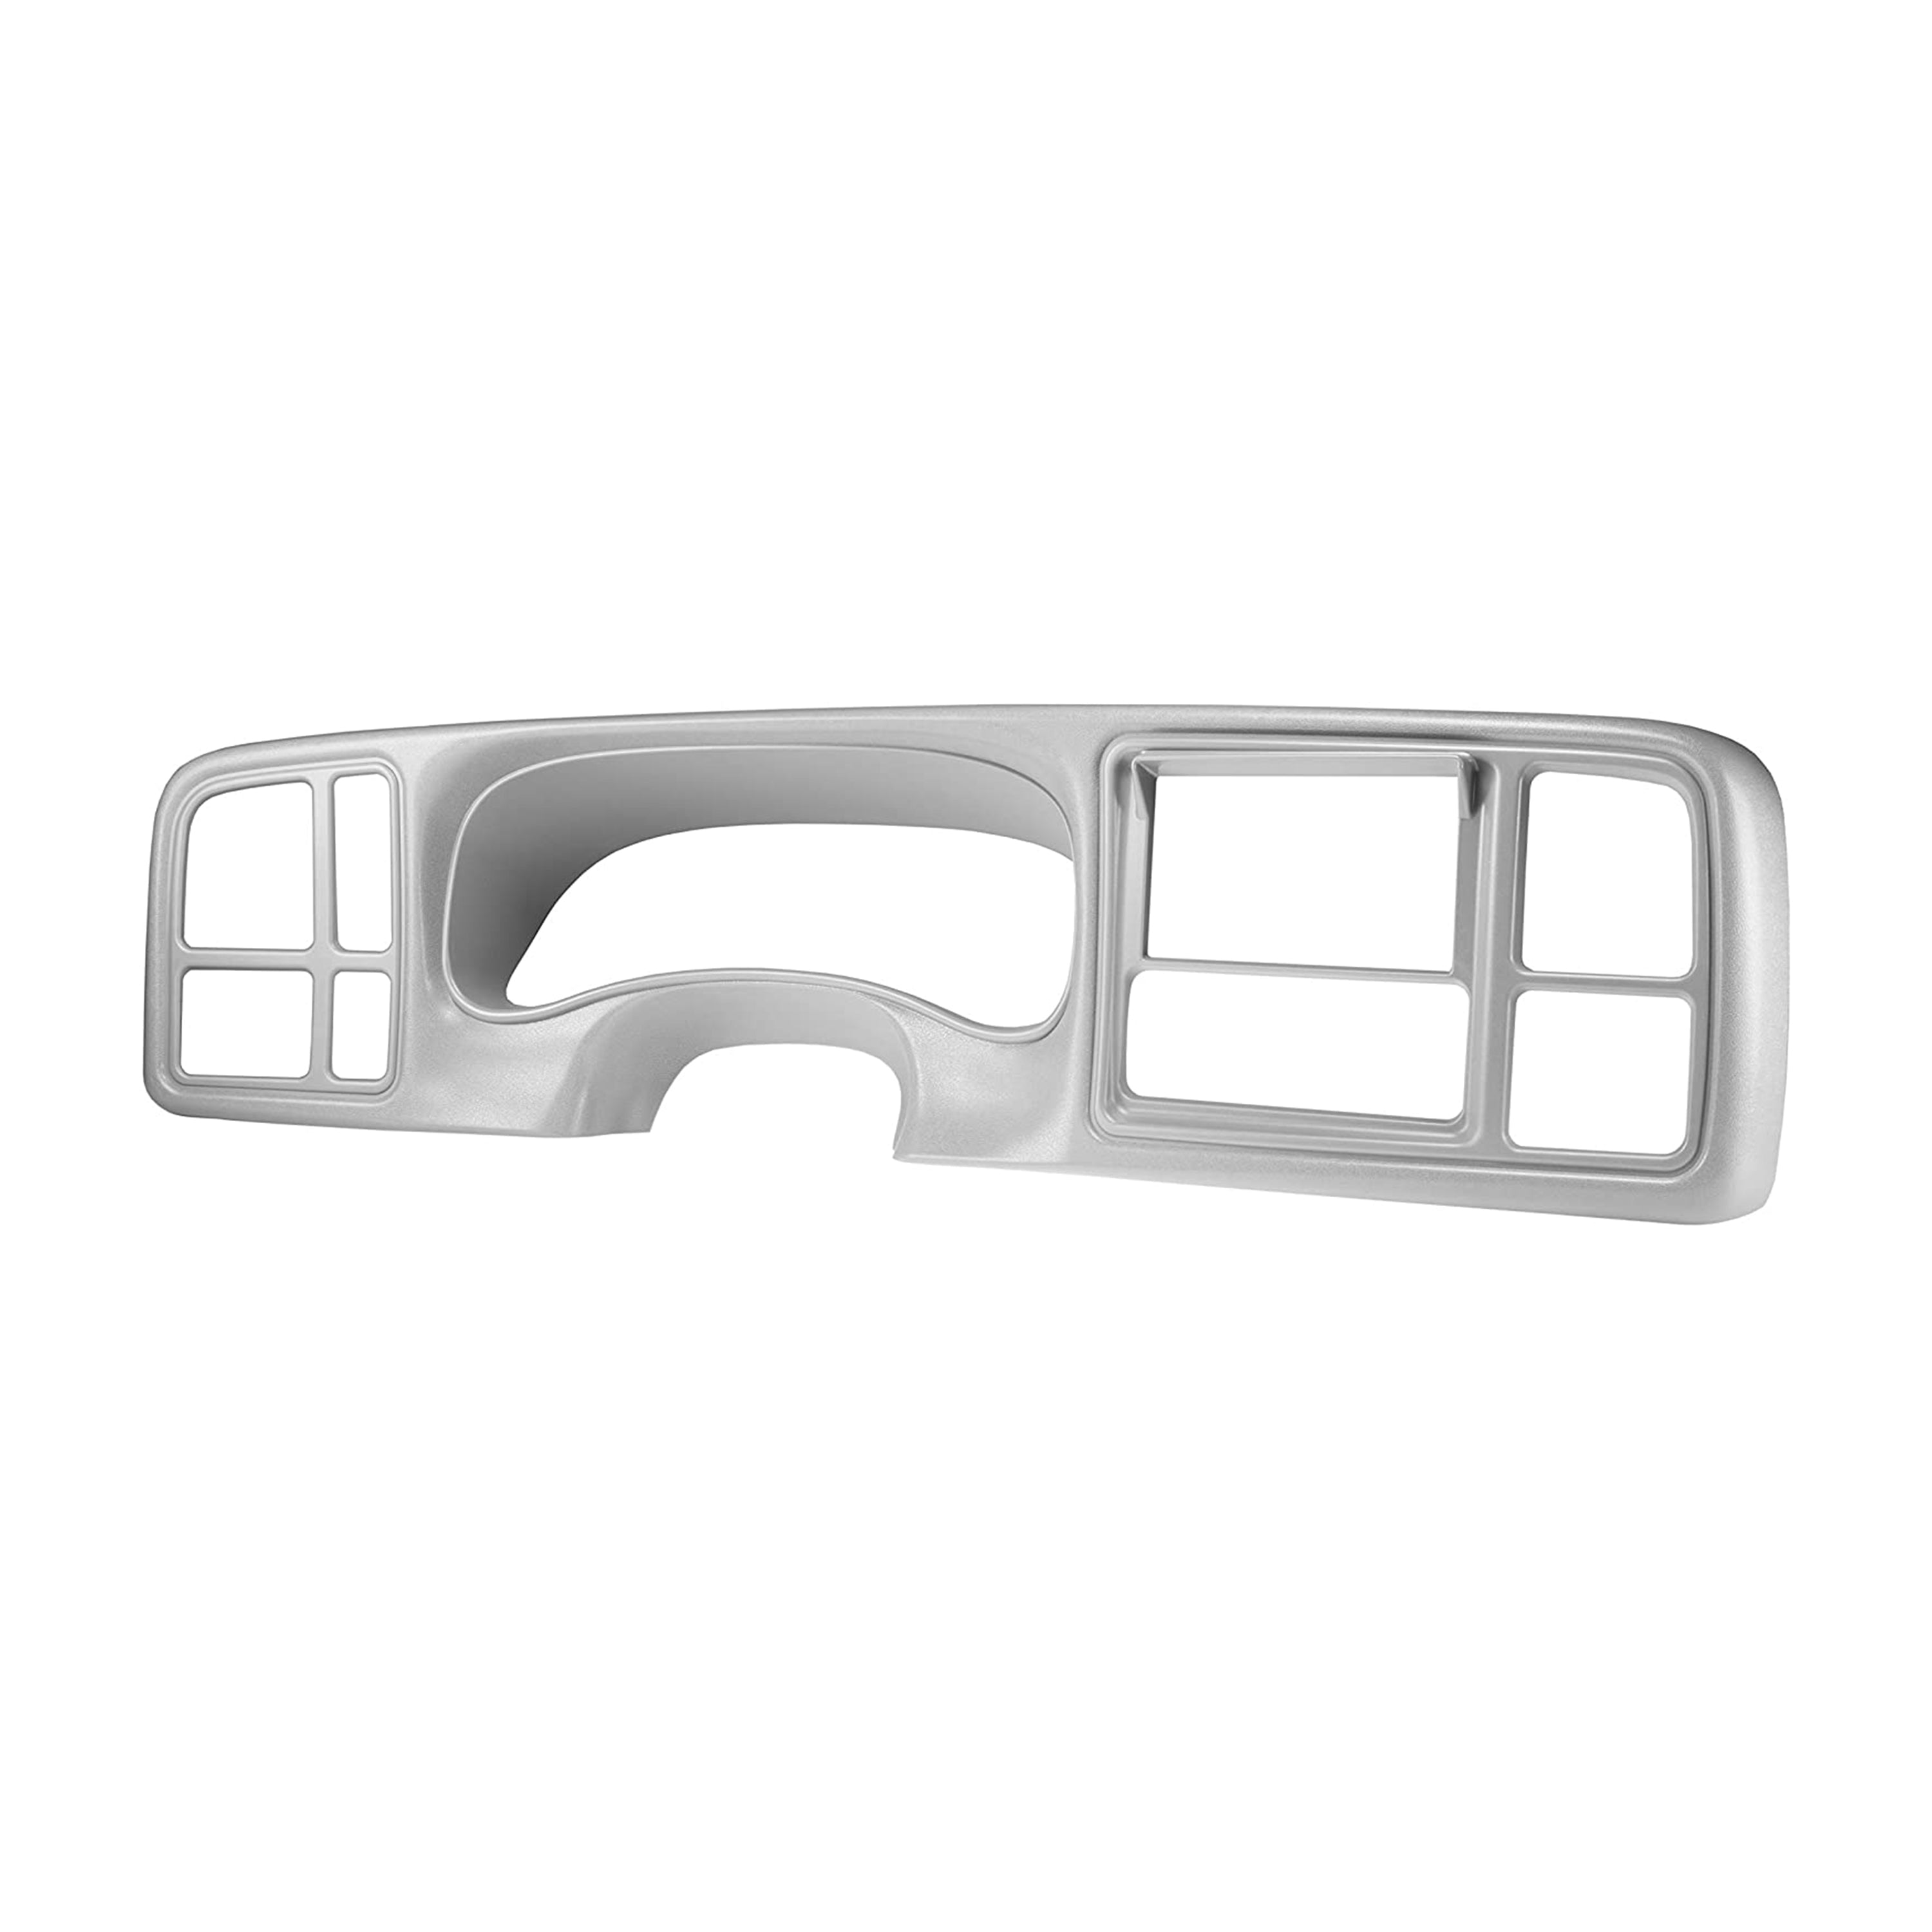 Scosche GM5602DDPWB, 1999-2002 Chevy & GMC Double DIN Pewter